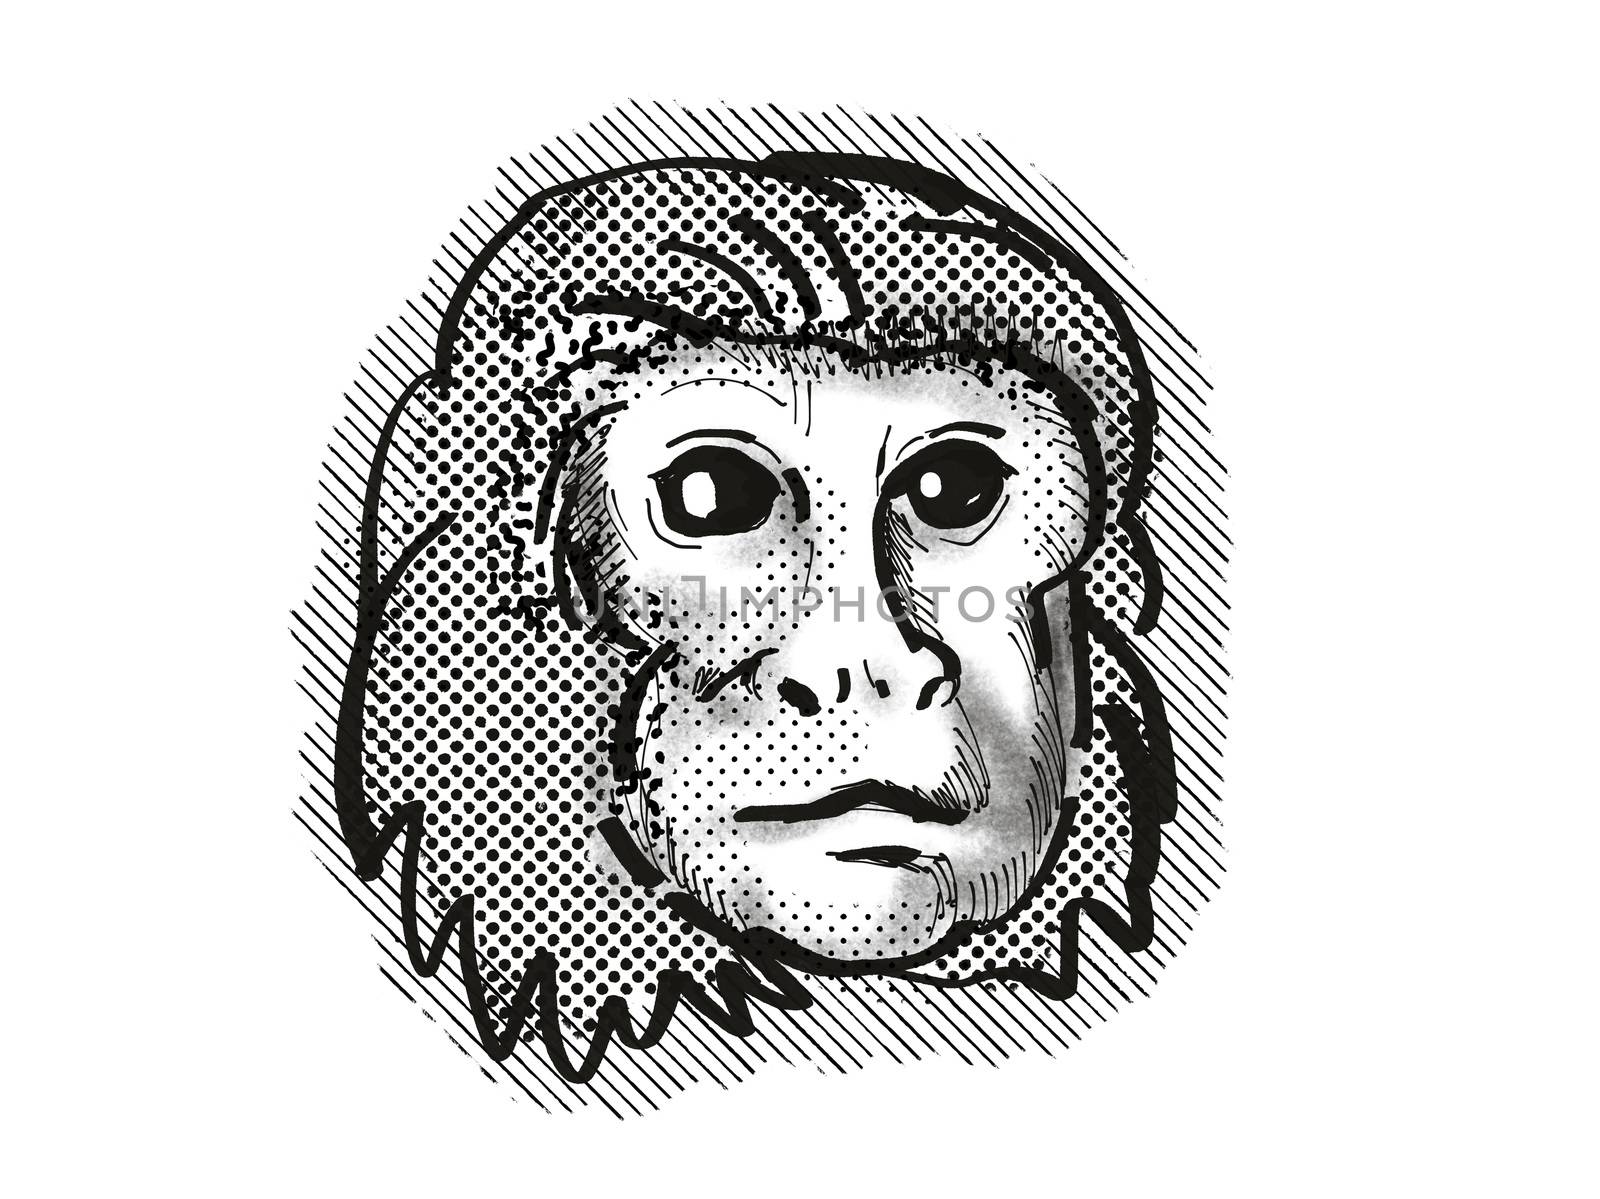 Retro cartoon style drawing head of a Golden Lion Tamarin , a monkey species viewed from front on isolated white background done in black and white